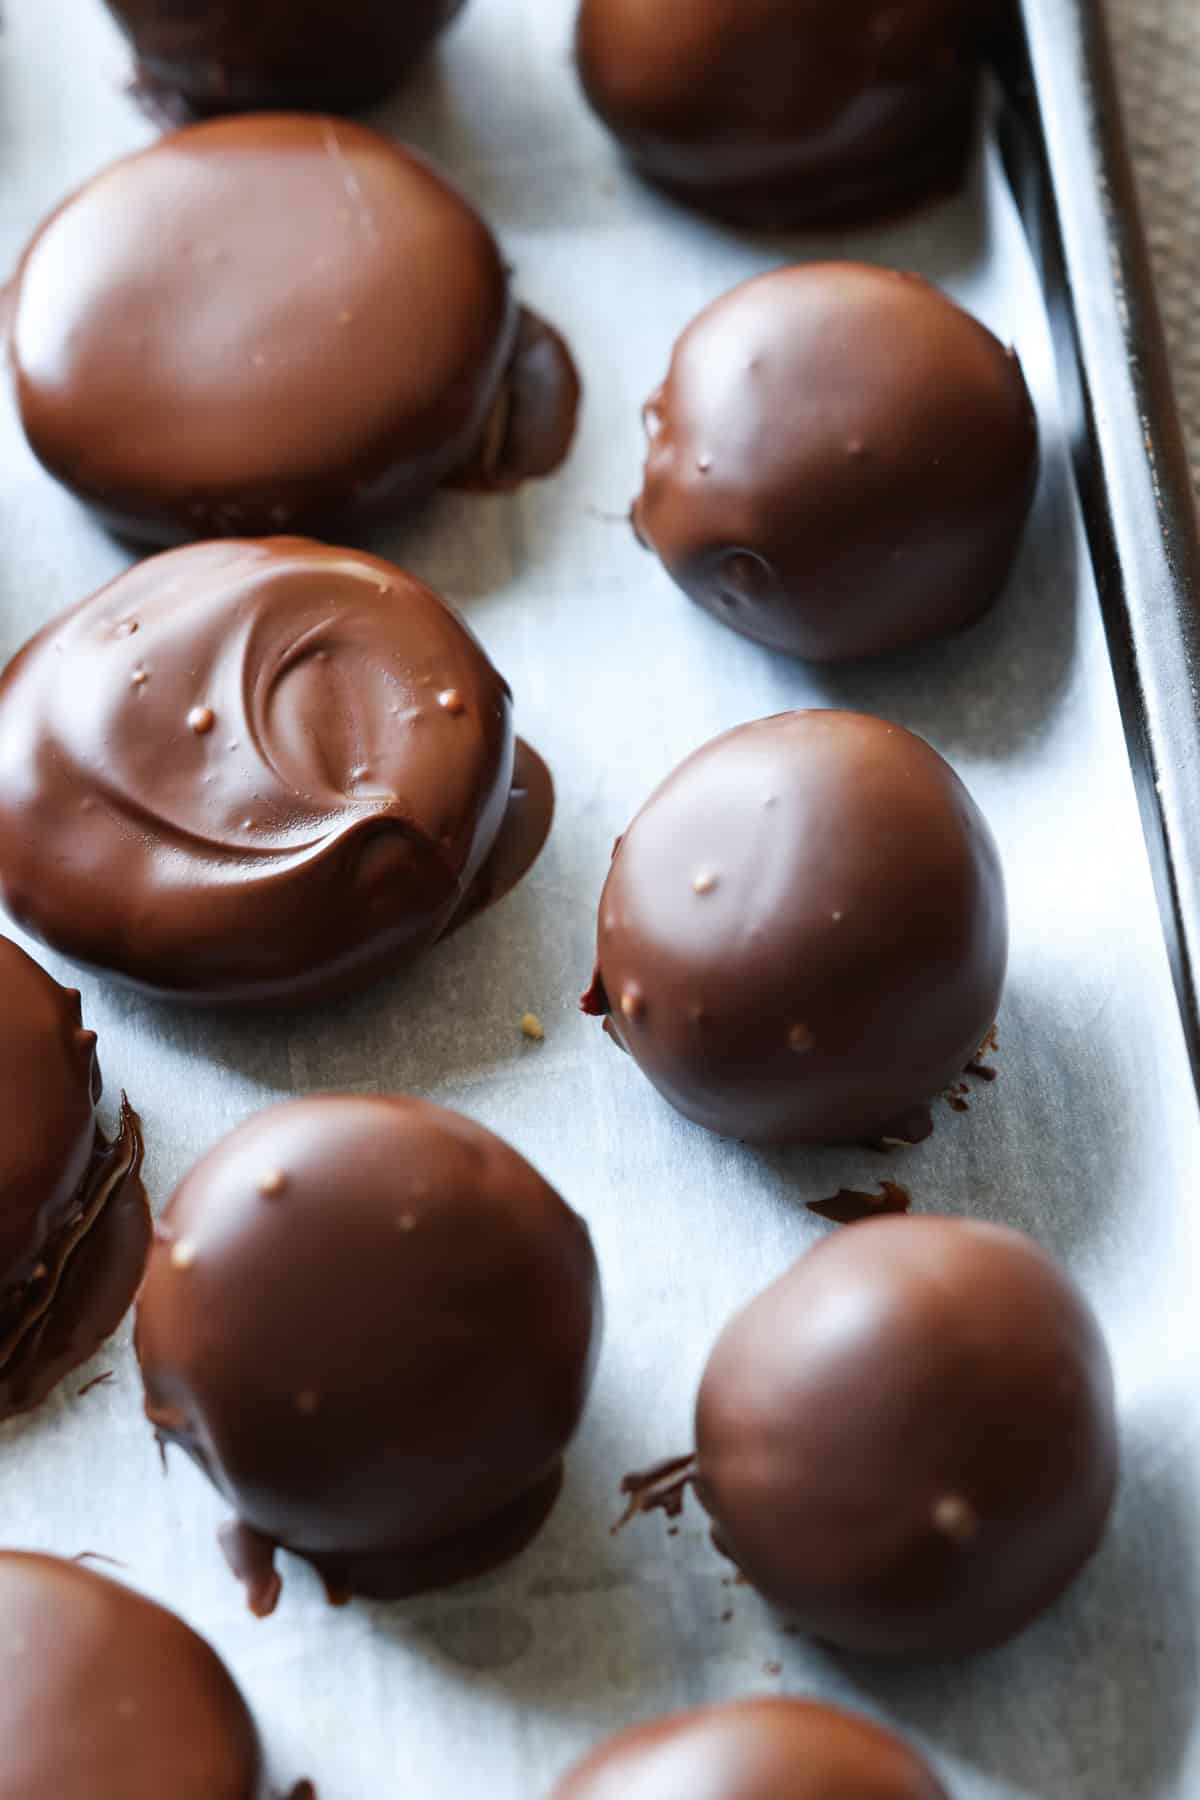 Chocolate set on a peanut butter truffle after being coated.